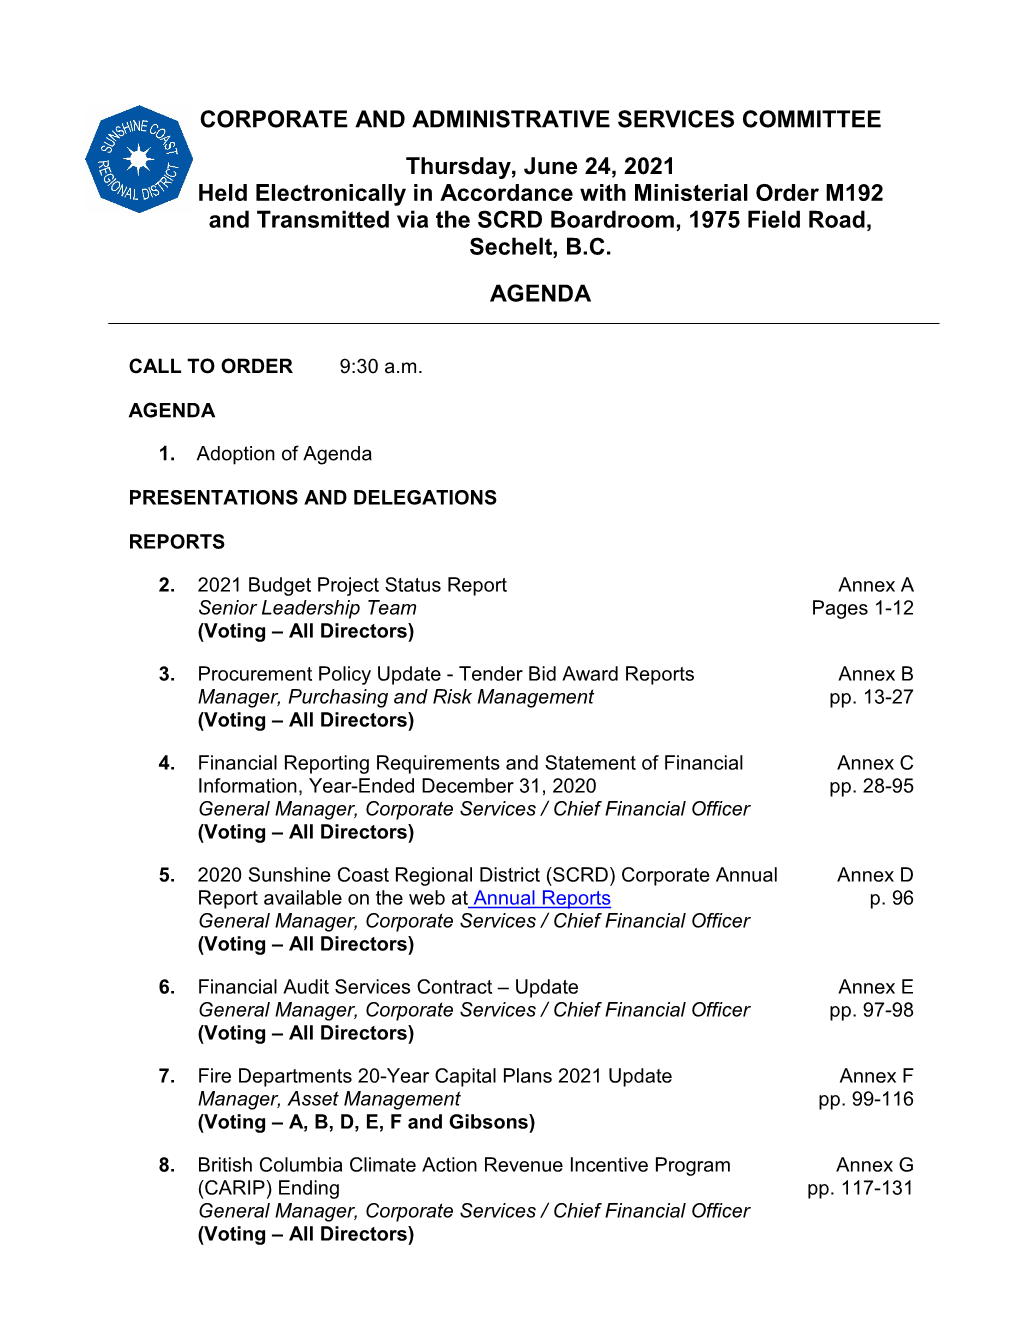 Thursday, June 24, 2021 Held Electronically in Accordance with Ministerial Order M192 and Transmitted Via the SCRD Boardroom, 1975 Field Road, Sechelt, B.C